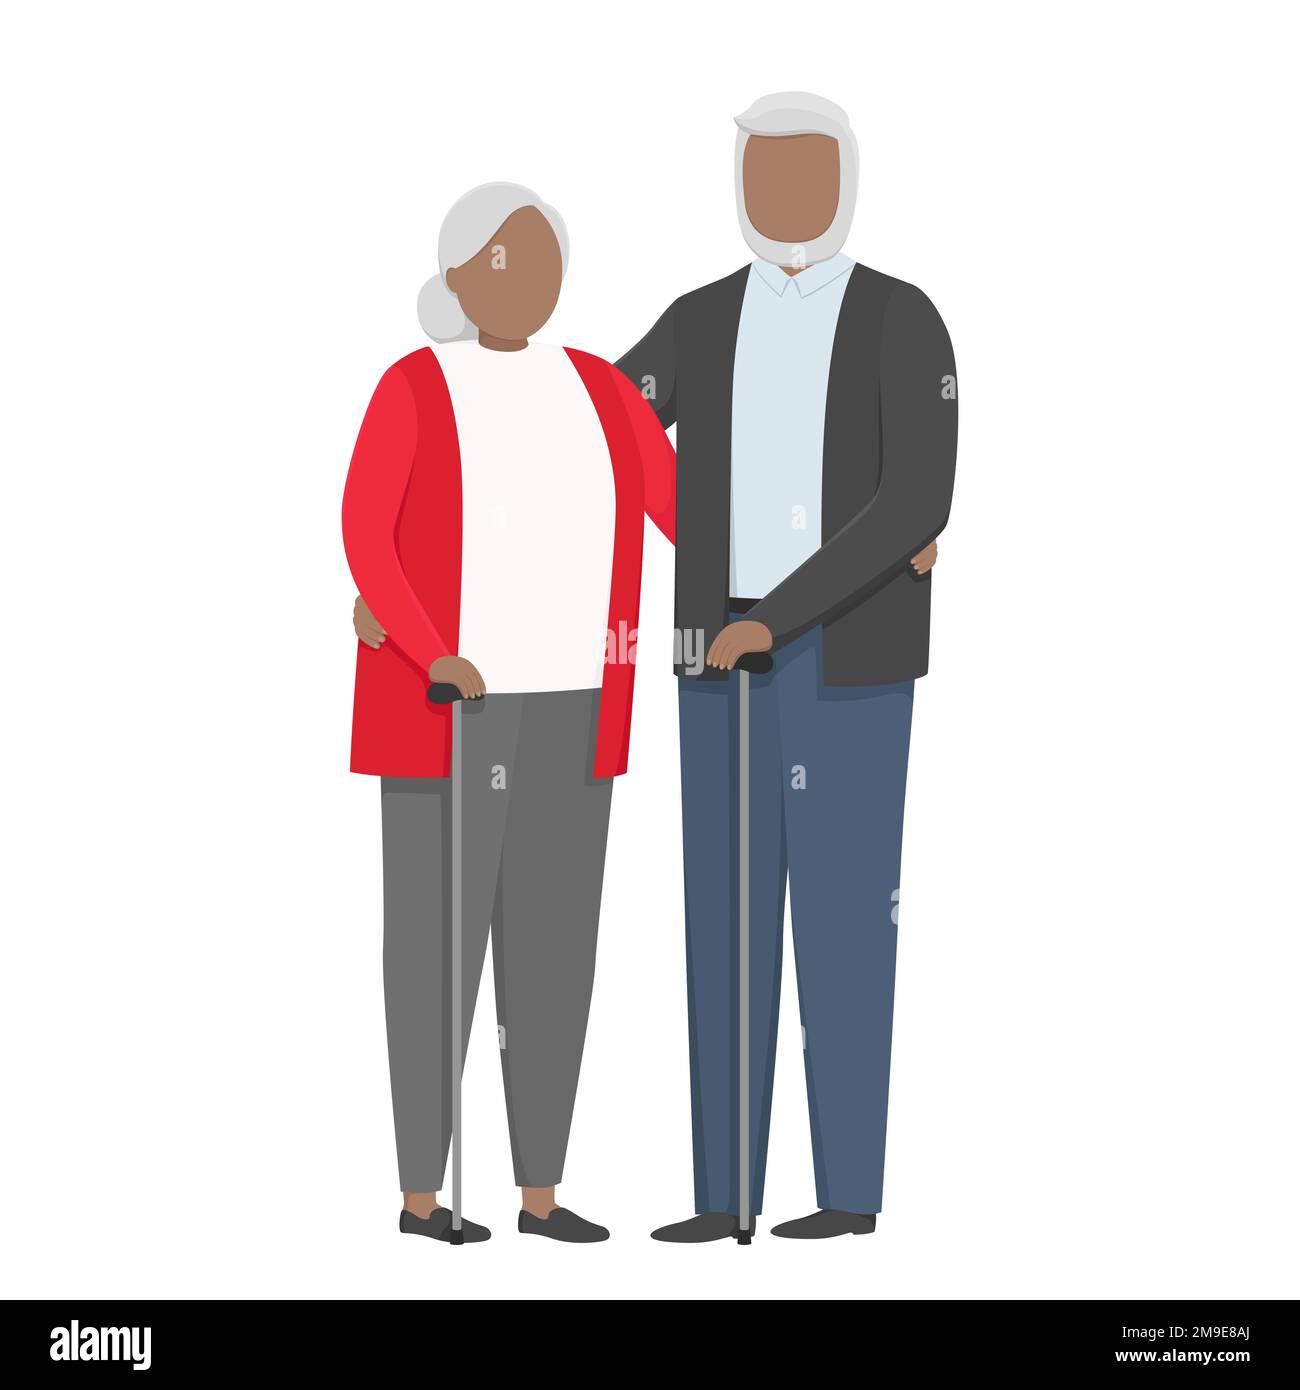 Retired people with walking sticks. Vector illustration. Stock Vector